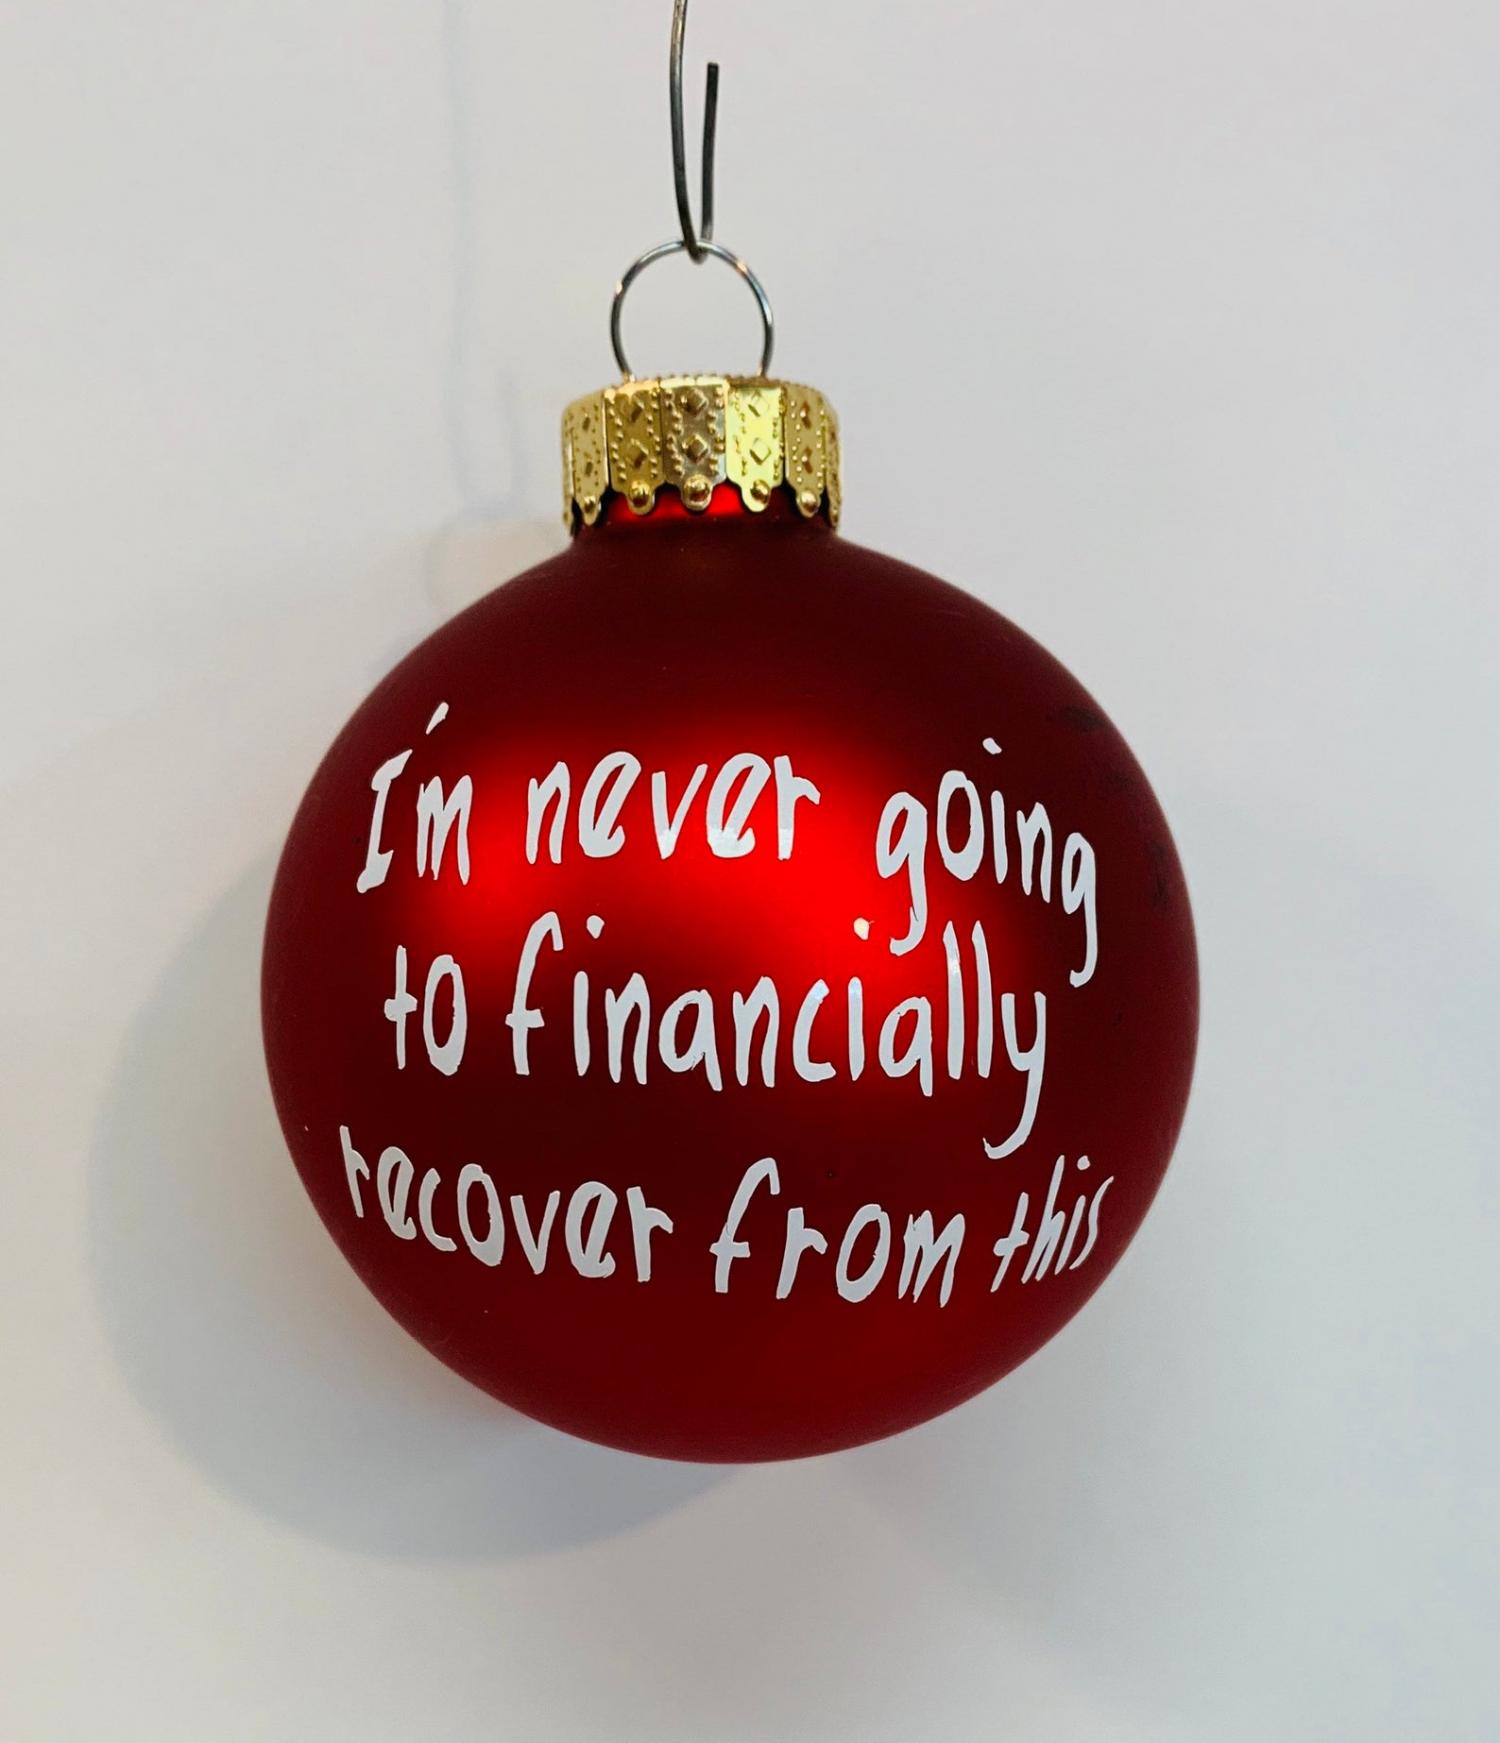 I'm never going to financially recover from this red ball Christmas Ornament